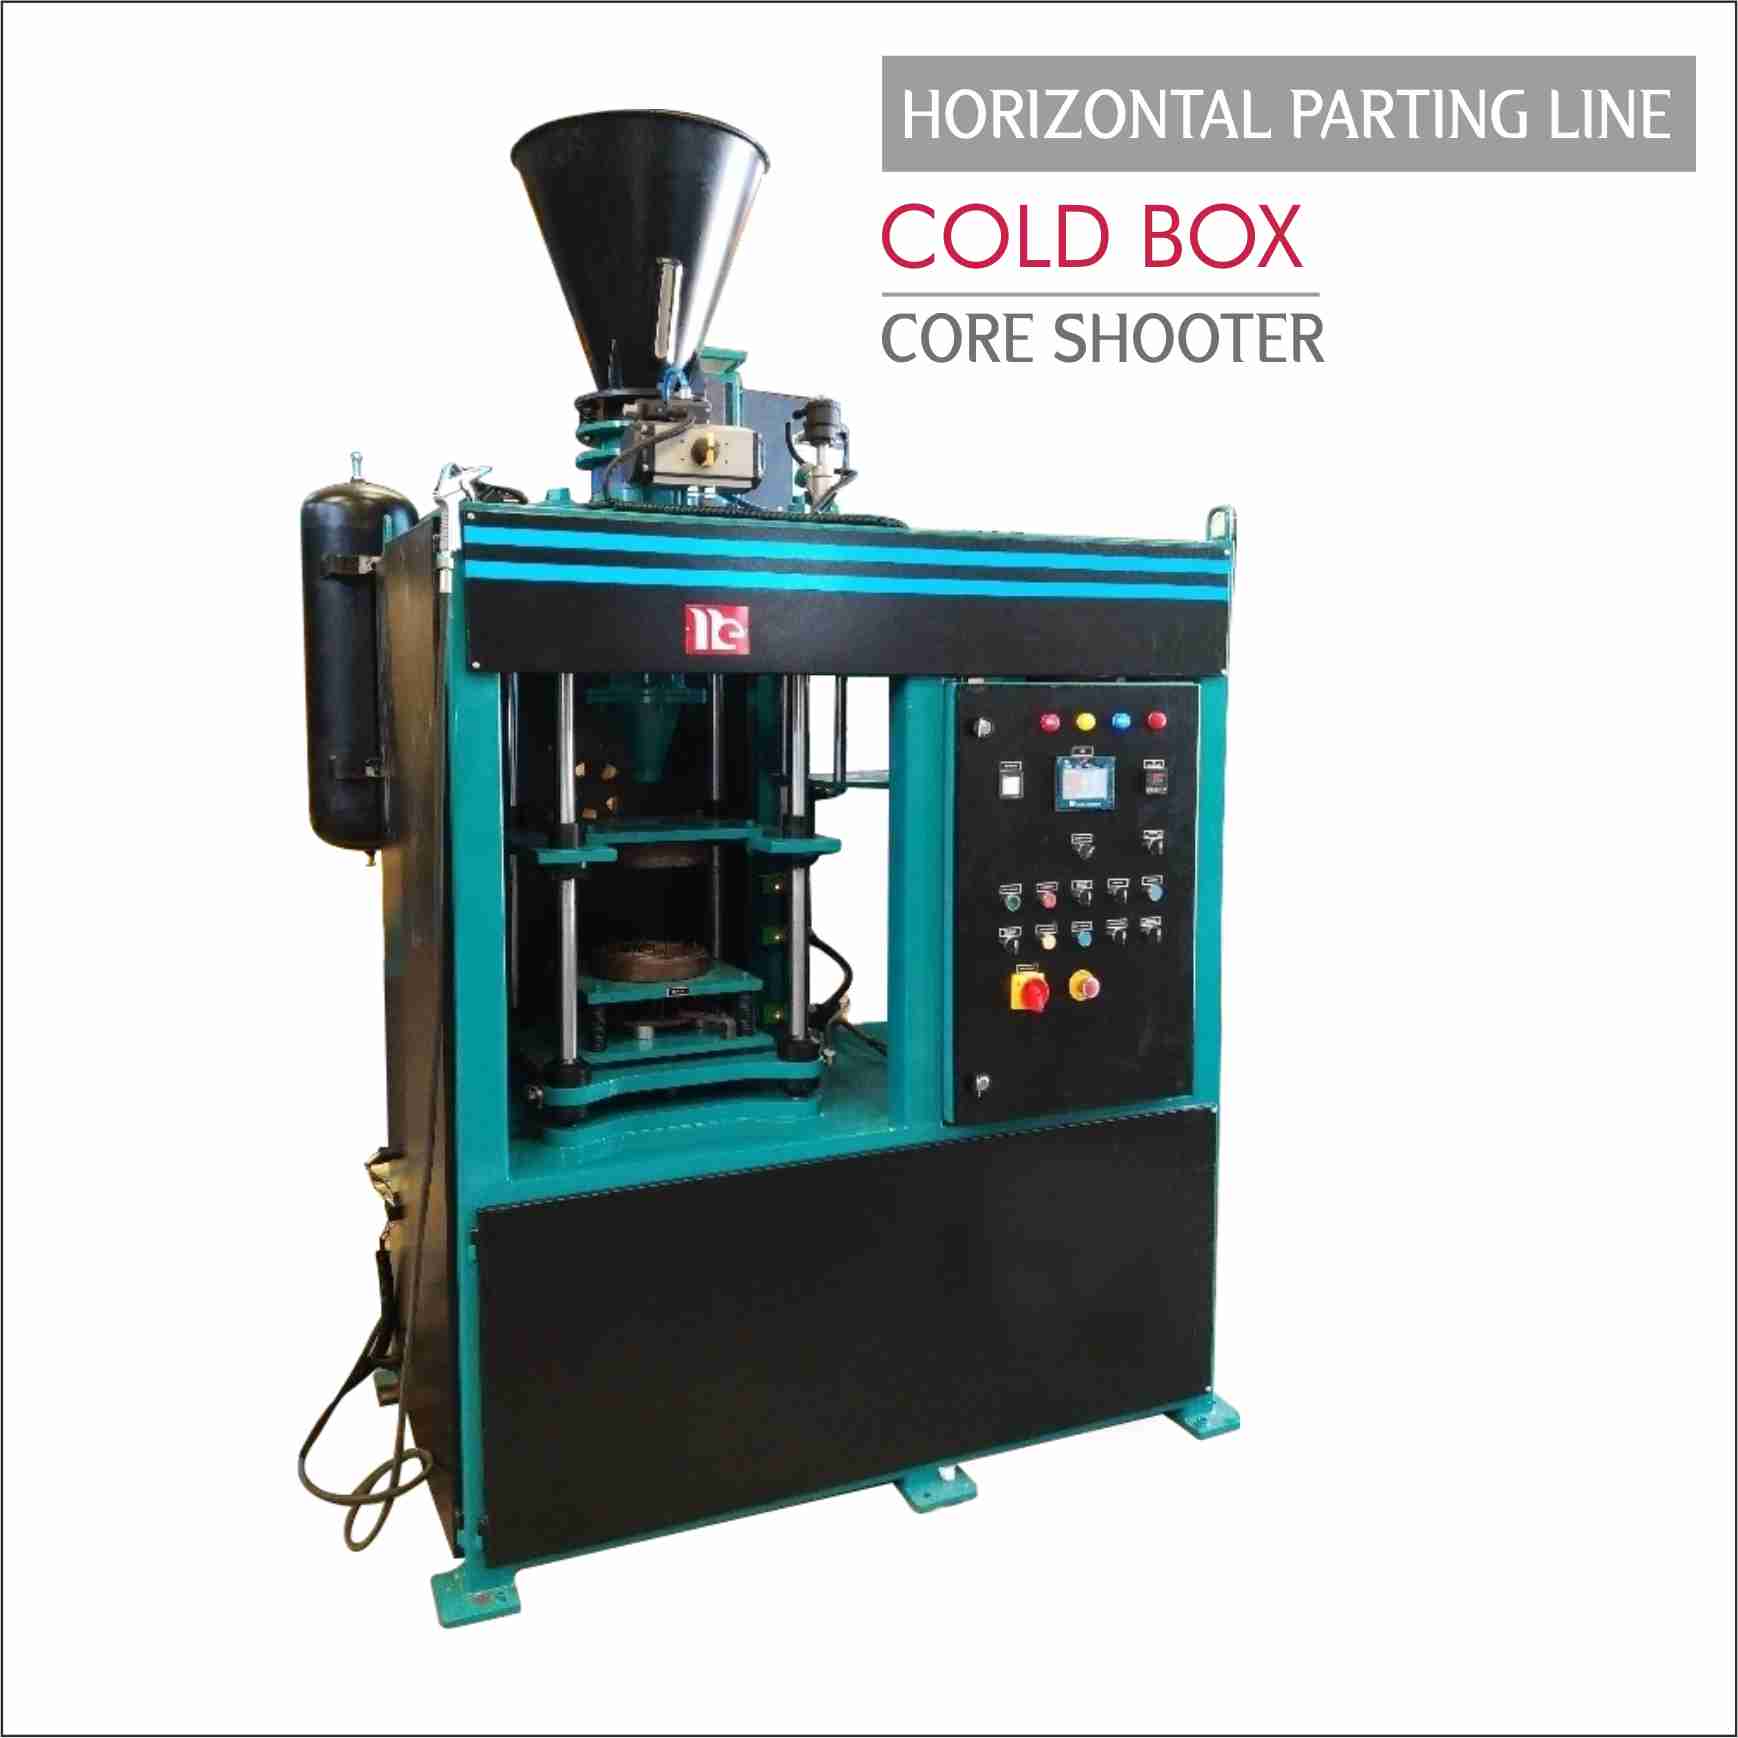 HORIZONTAL PARTING LINE COLD BOX CORE SHOOTER 2